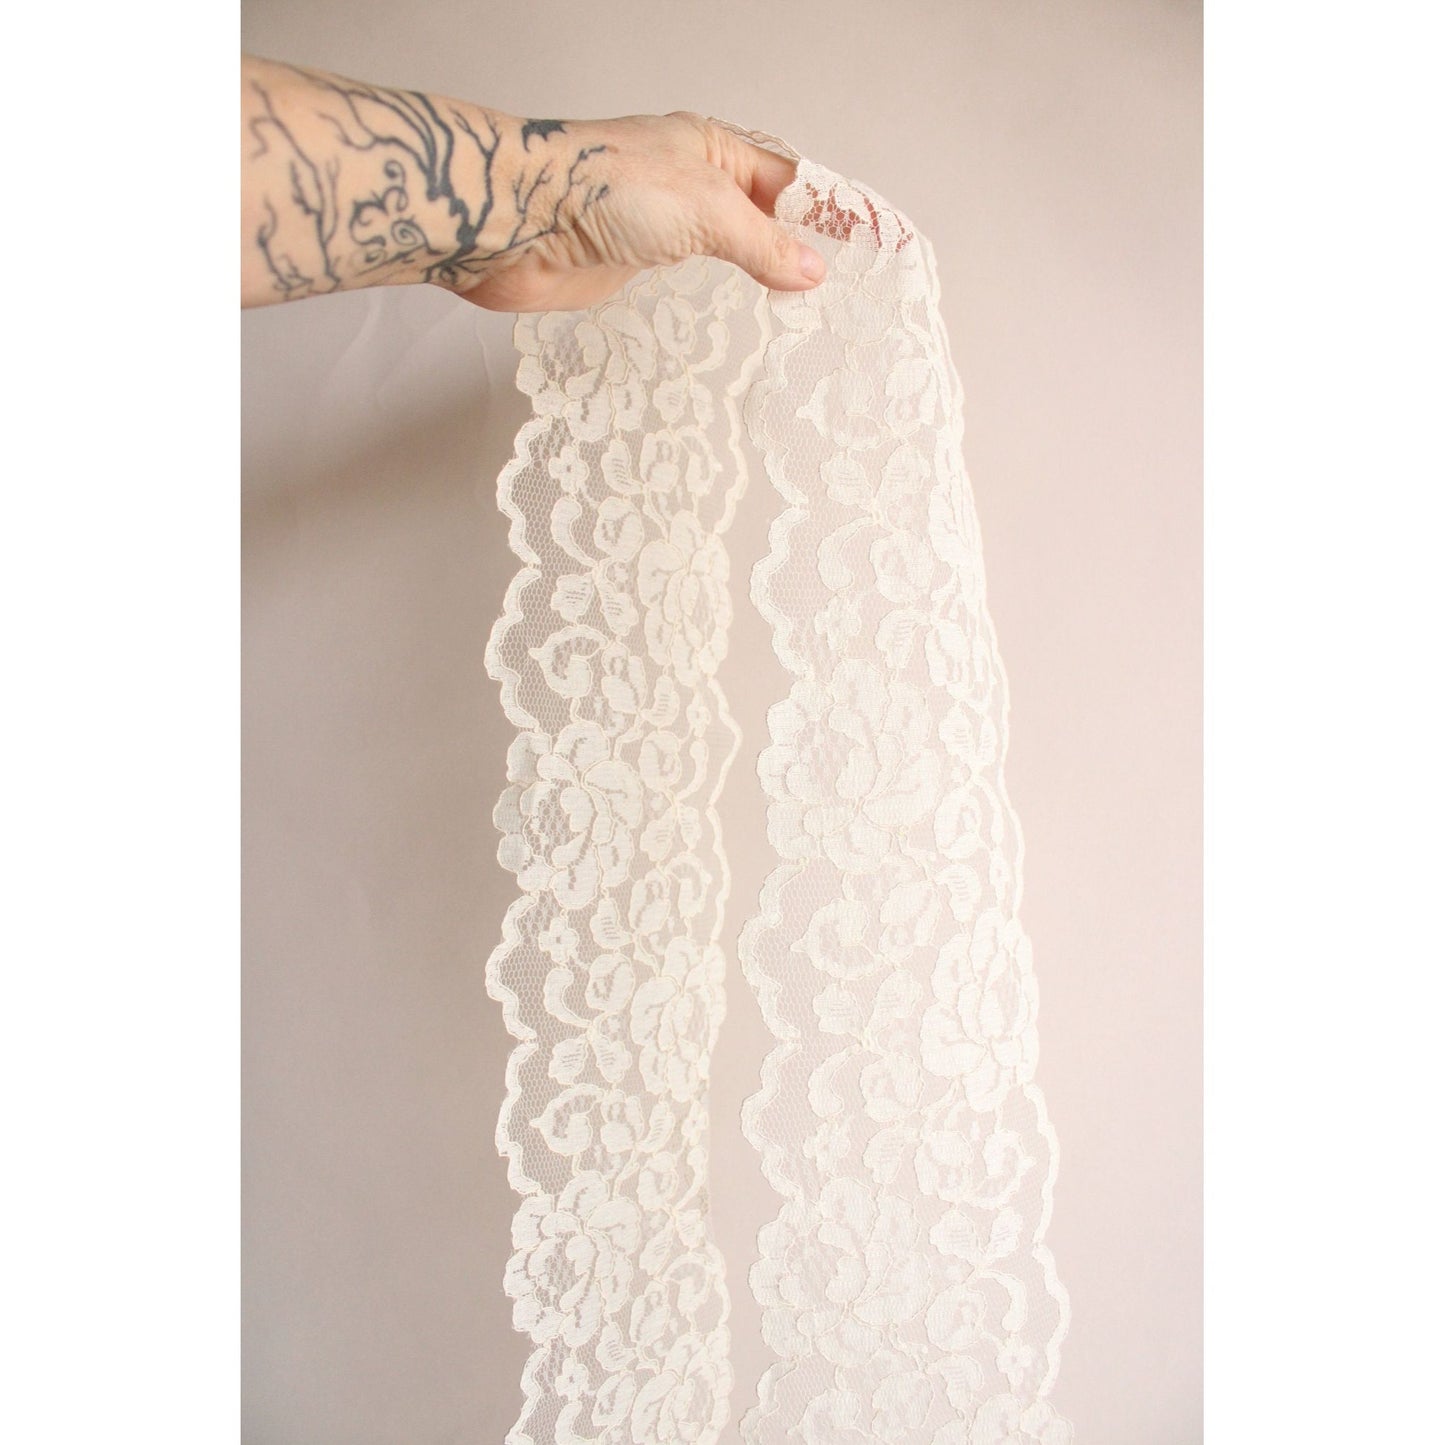 Vintage Lace Trim, Extra Wide Ivory, 2.25 Yards,  5.5" Wide